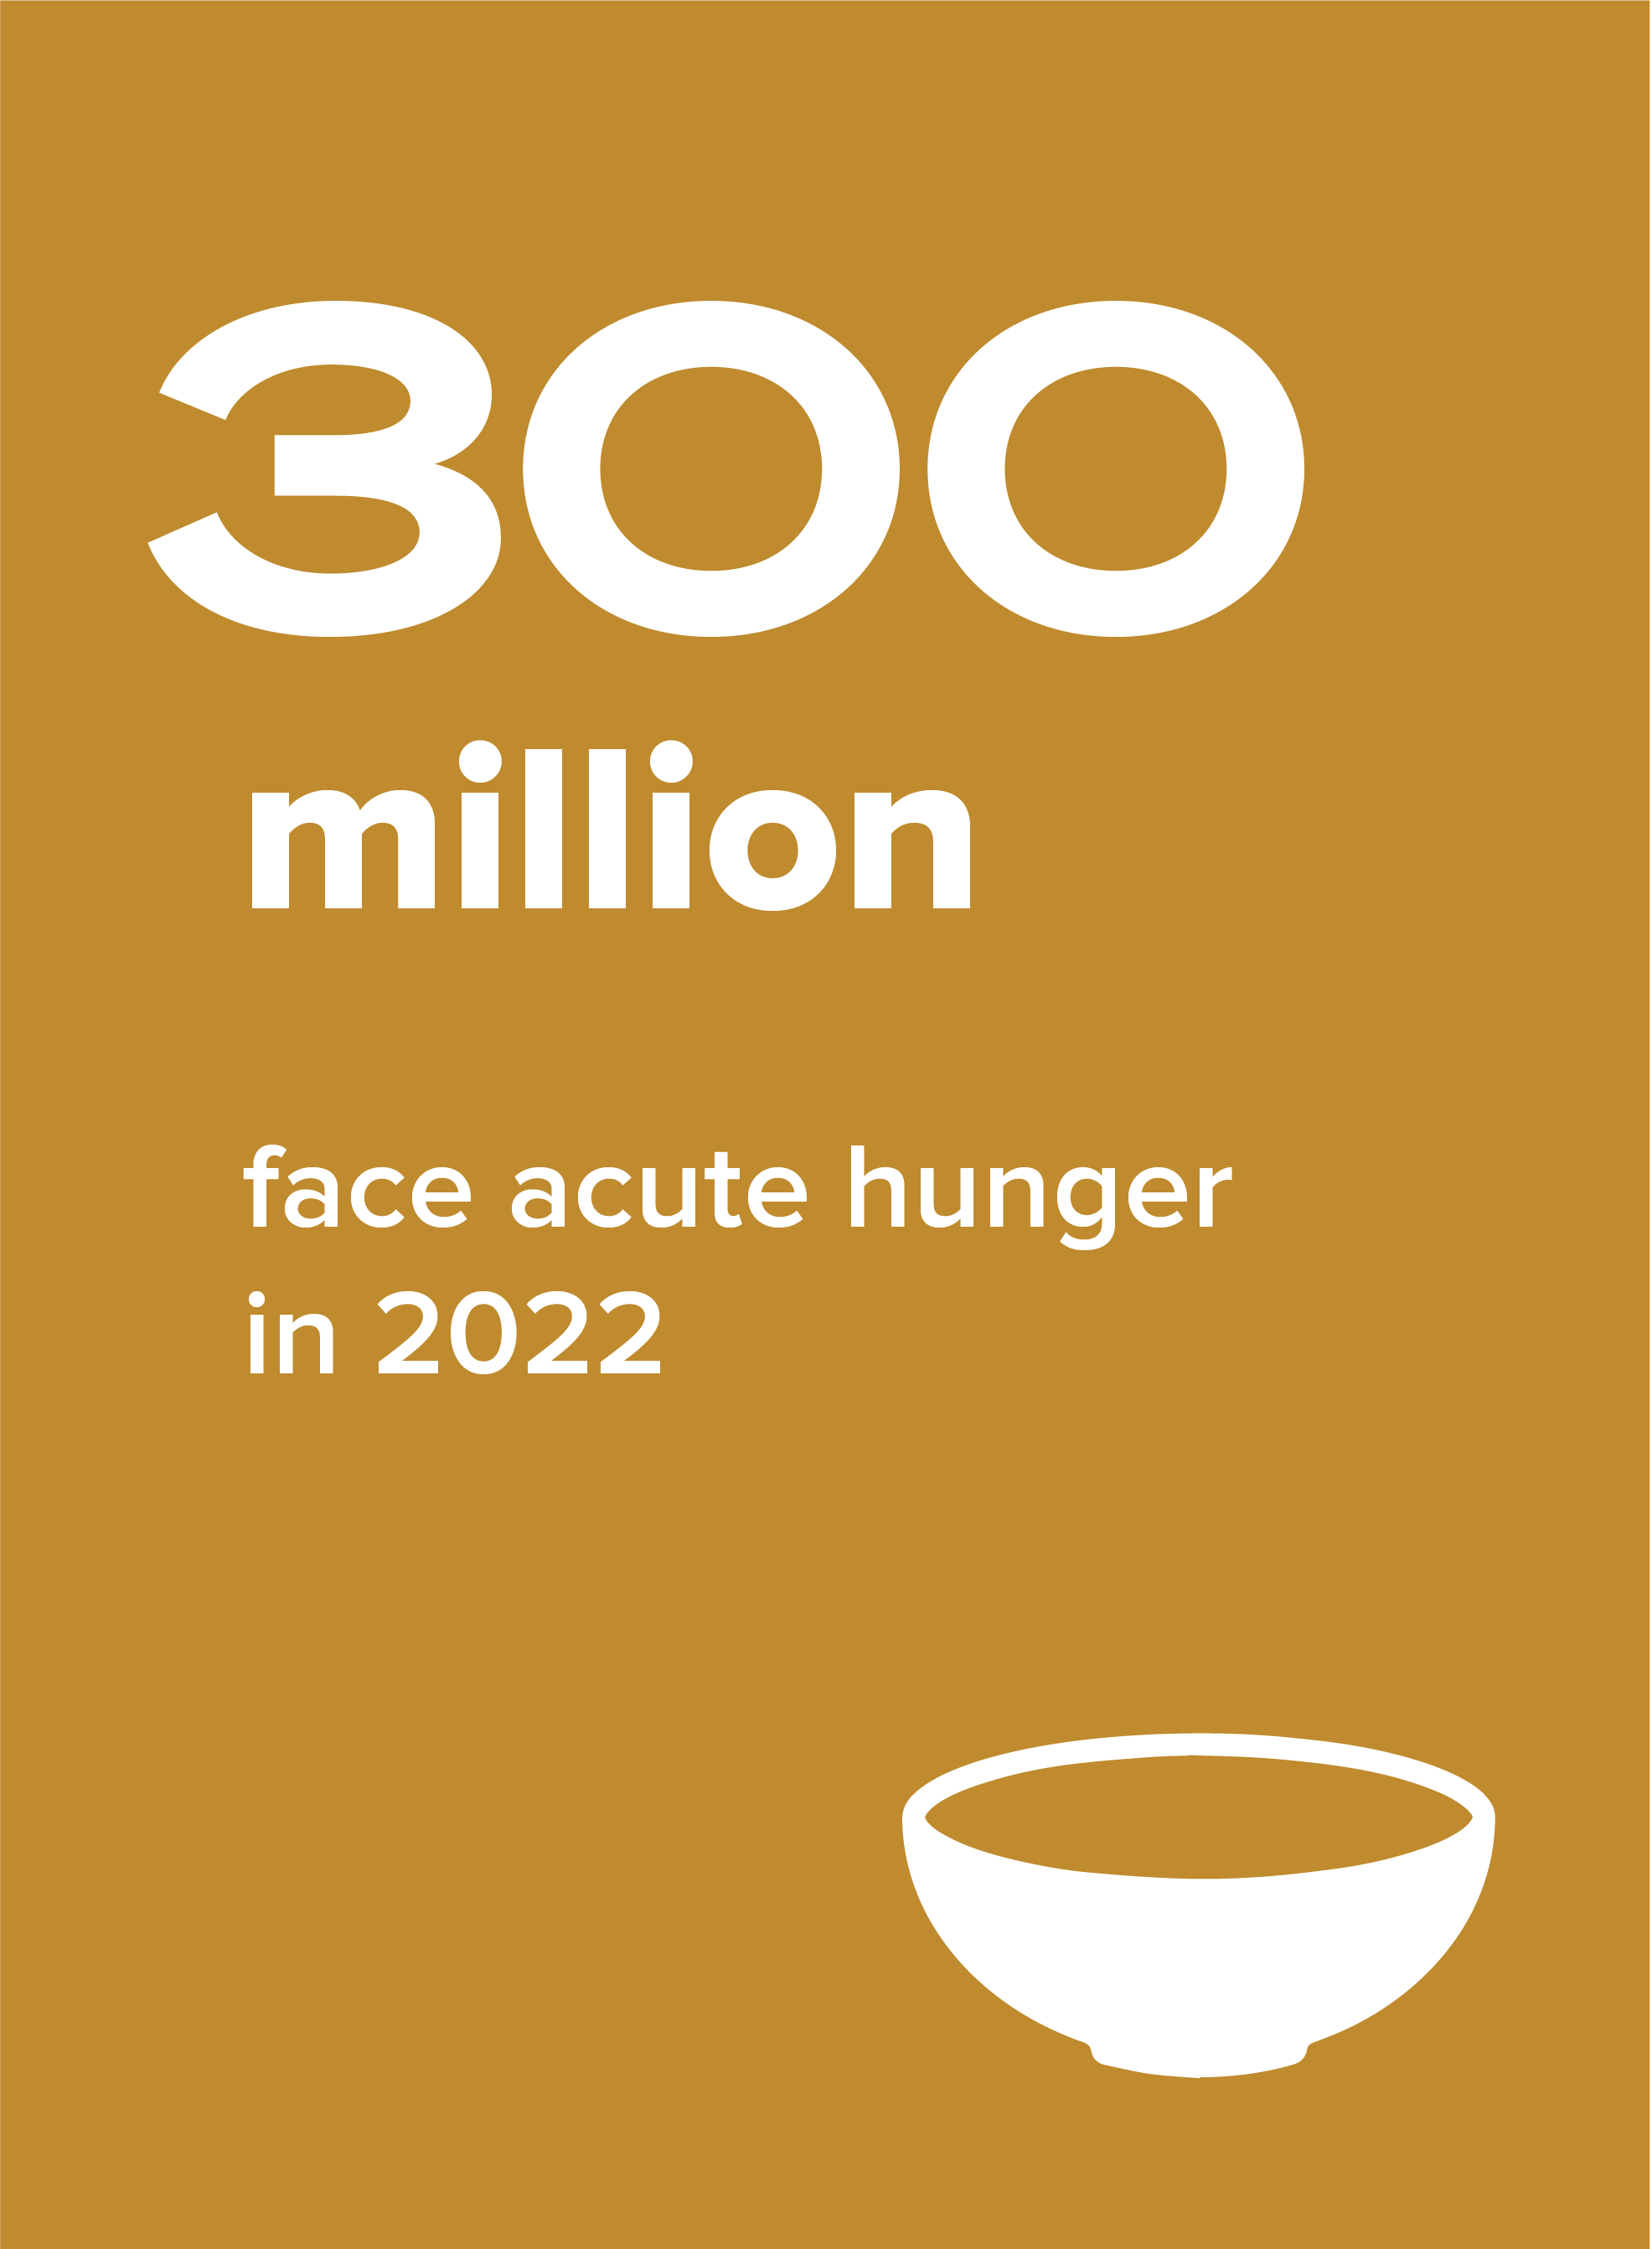 300 million people face hunger in 2022